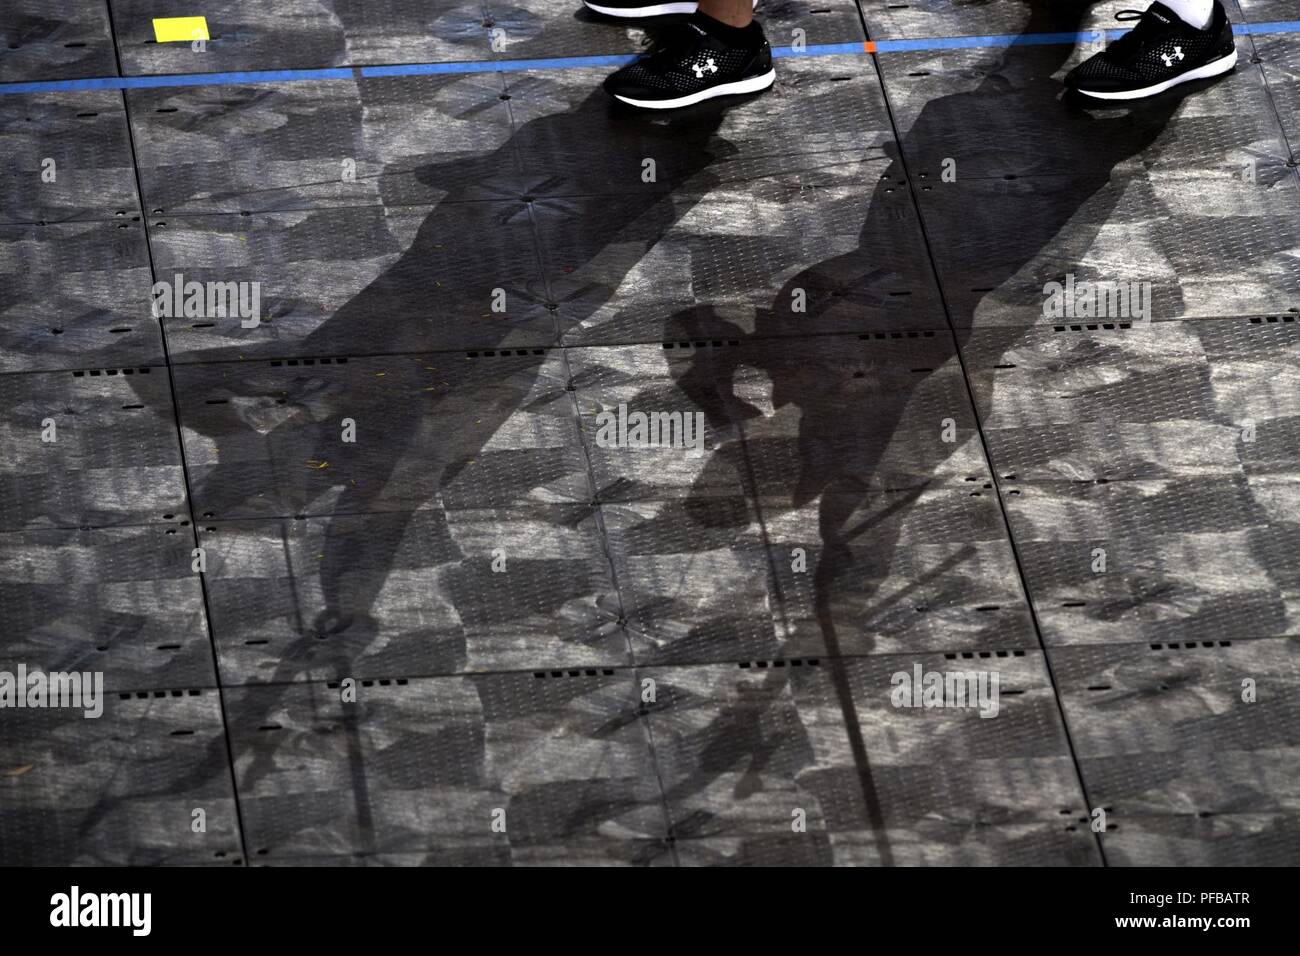 Shadows from a pair of archers decorate a floor during practice for the 2018 Warrior Games at the Air Force Academy in Colorado Springs, Colo. June 1, 2018. Stock Photo